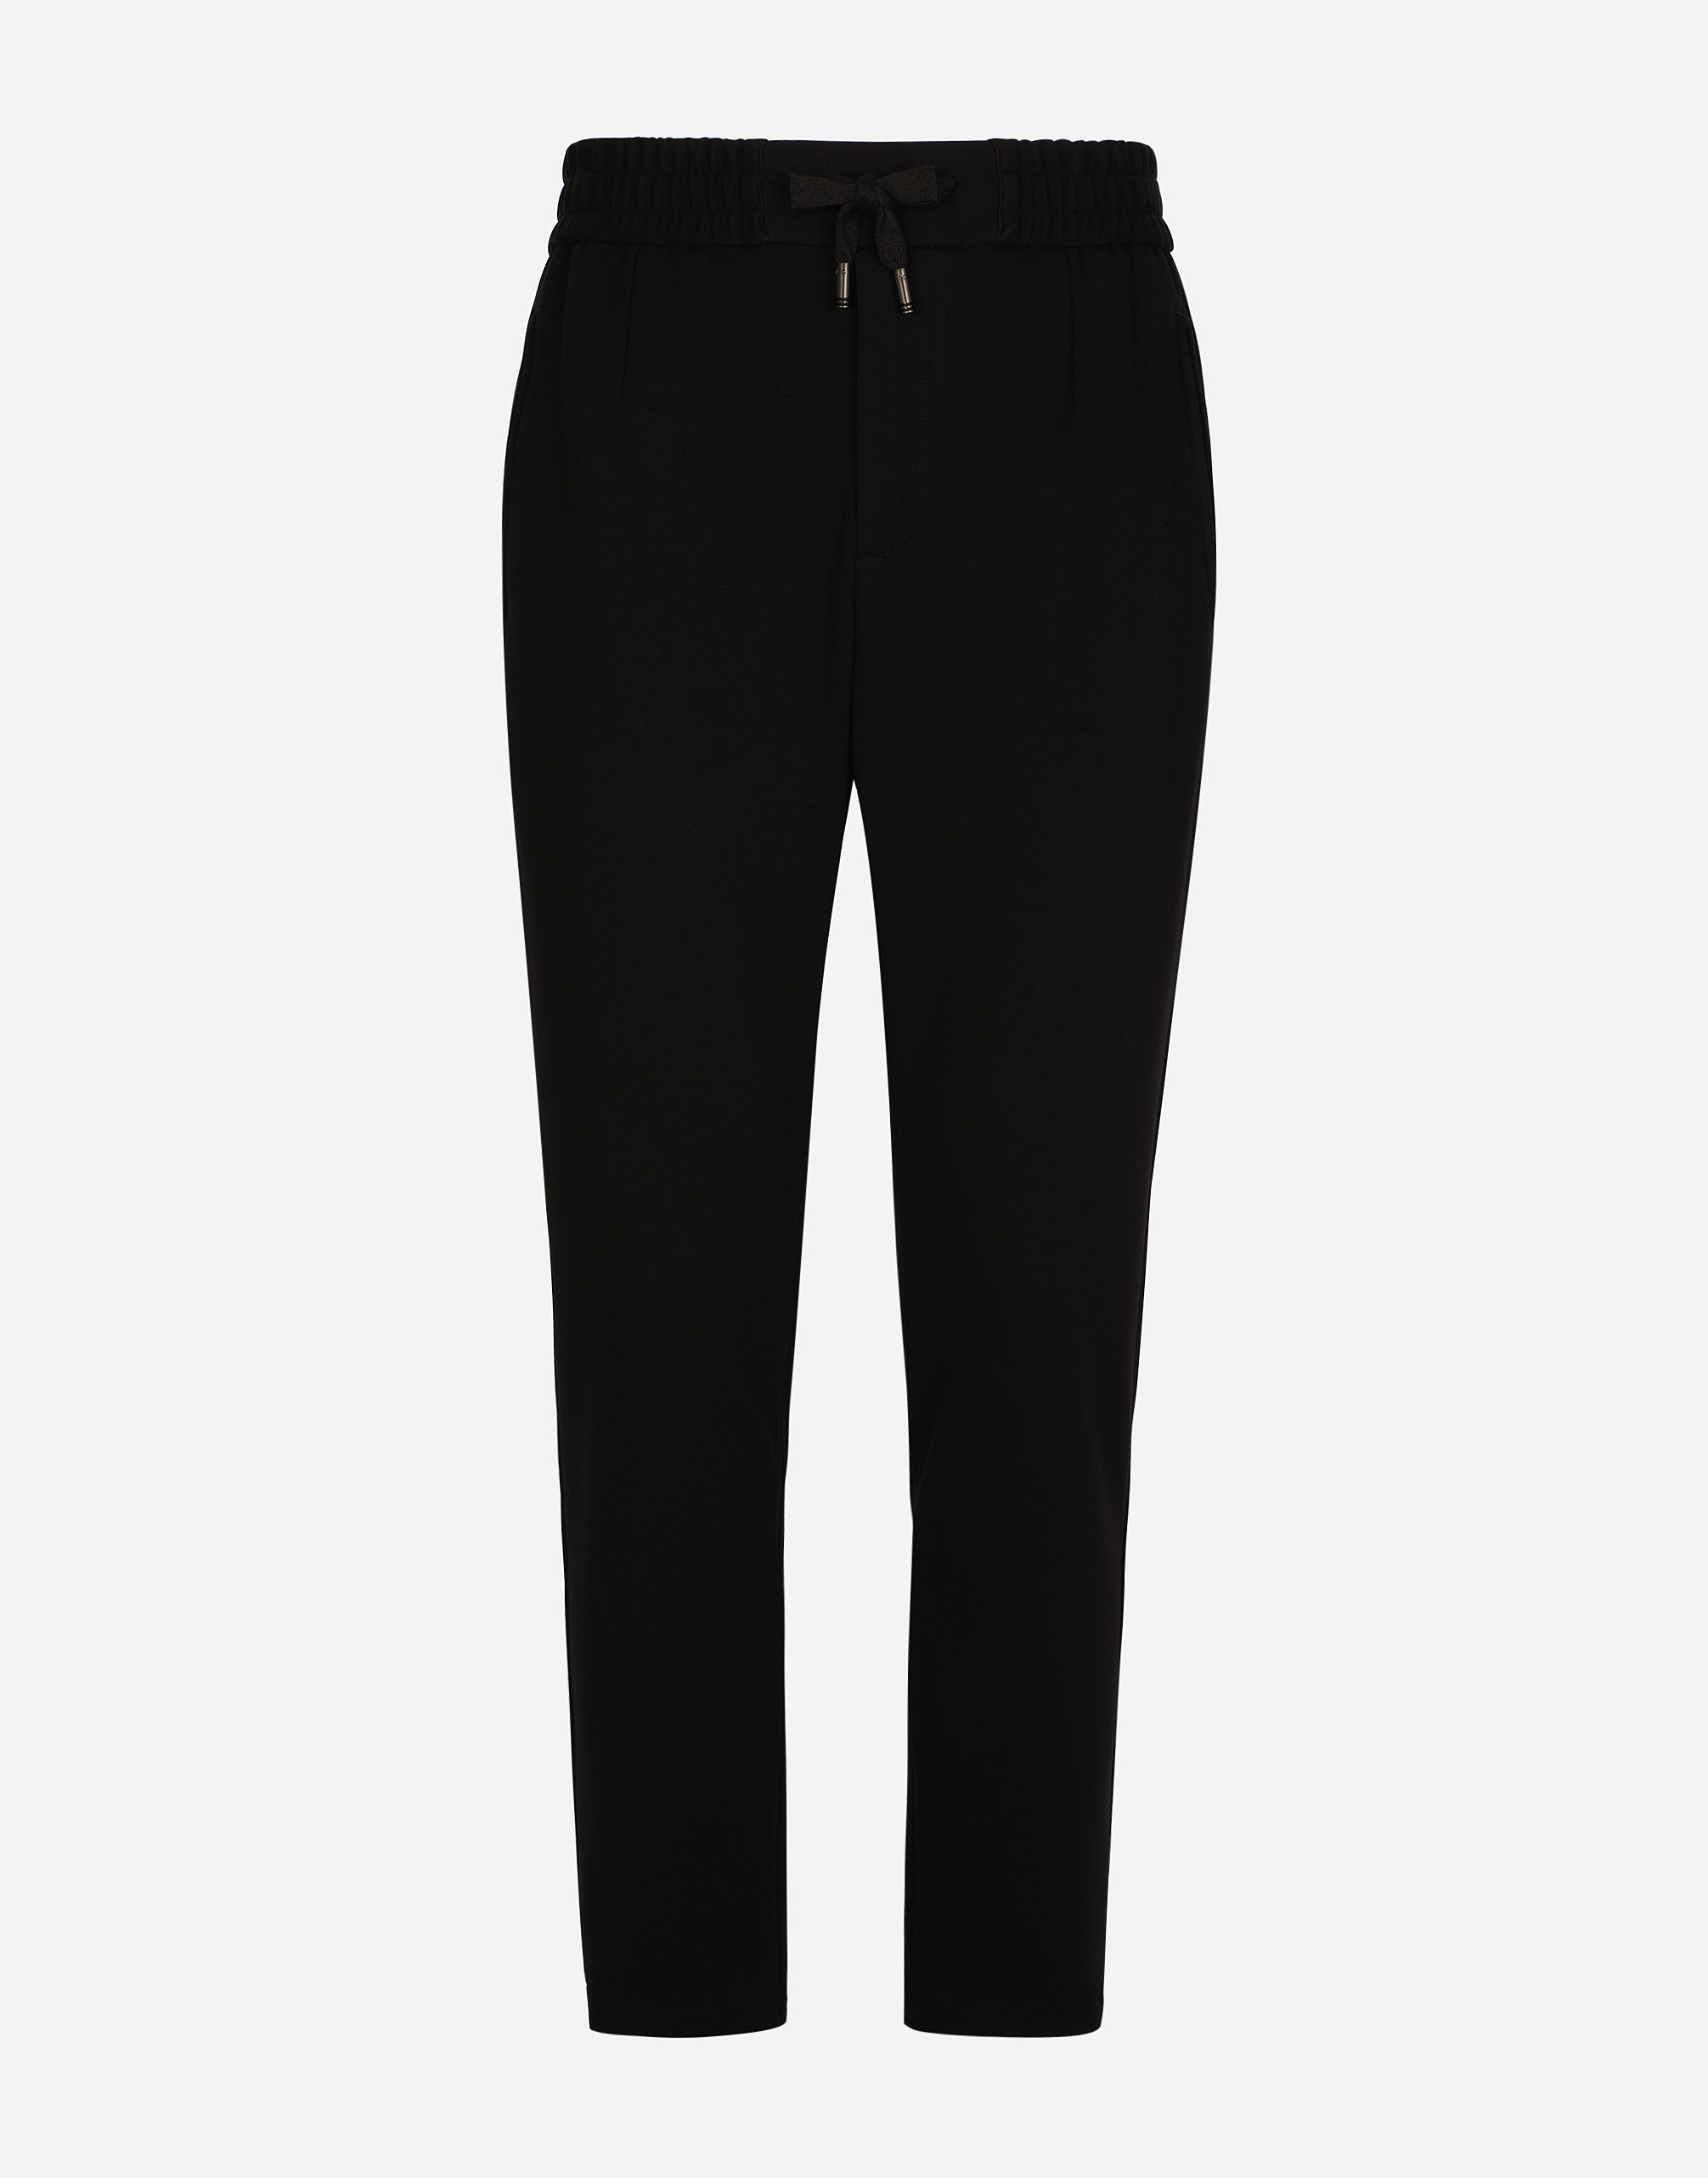 Dolce & Gabbana Jersey Jogging Pants With Dg Patch In Black